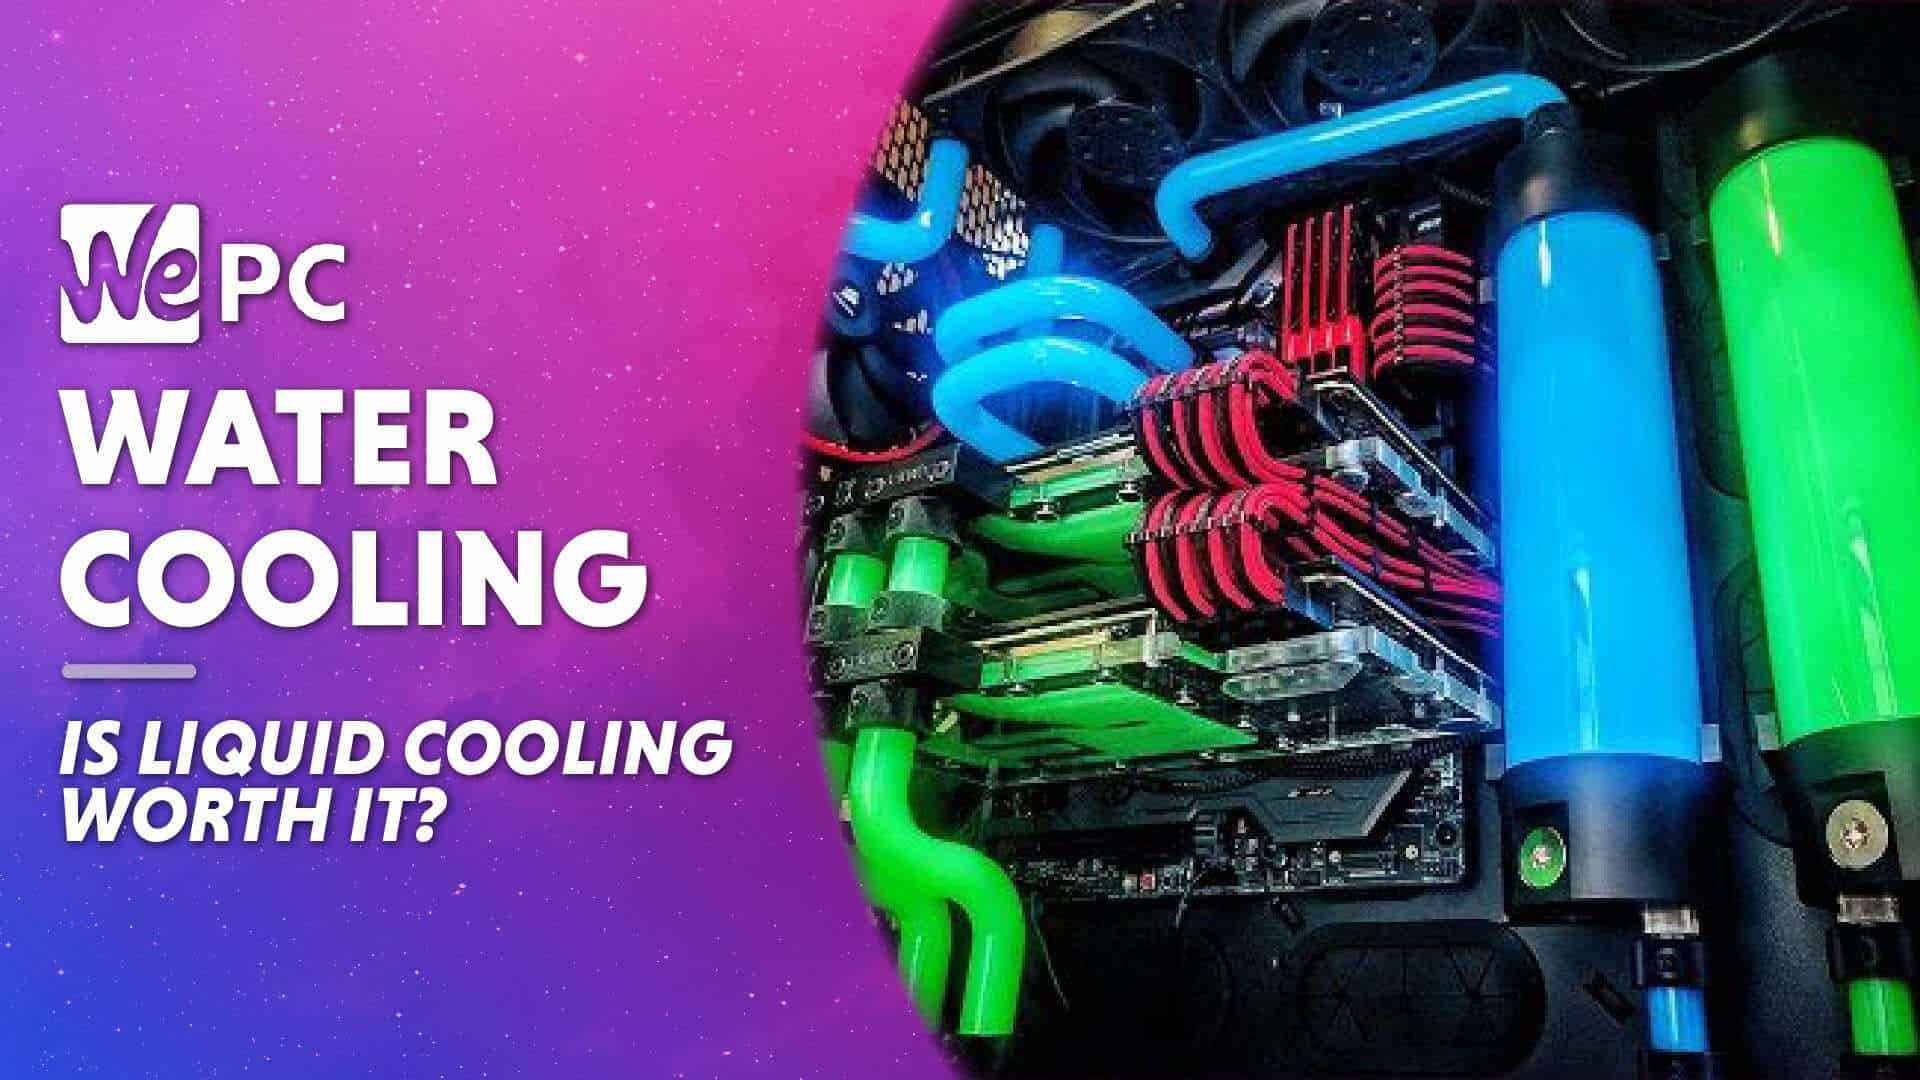 Is liquid cooling for PC worth it?